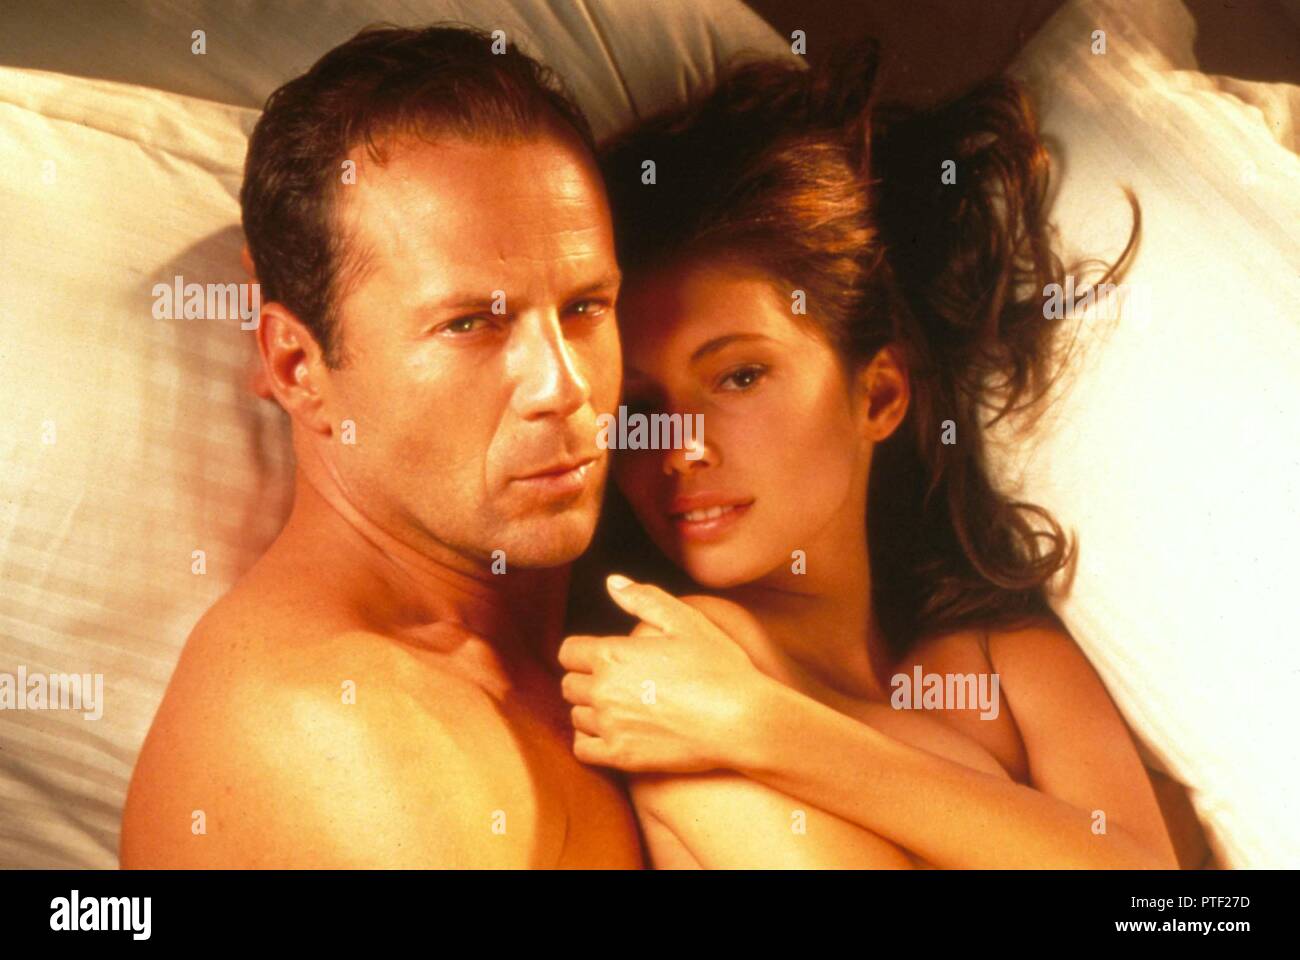 Original film title: COLOR OF NIGHT. English title: COLOR OF NIGHT. Year: 1994. Director: RICHARD RUSH. Stars: BRUCE WILLIS; JANE MARCH. Credit: HOLLYWOOD PICTURES / Album Stock Photo